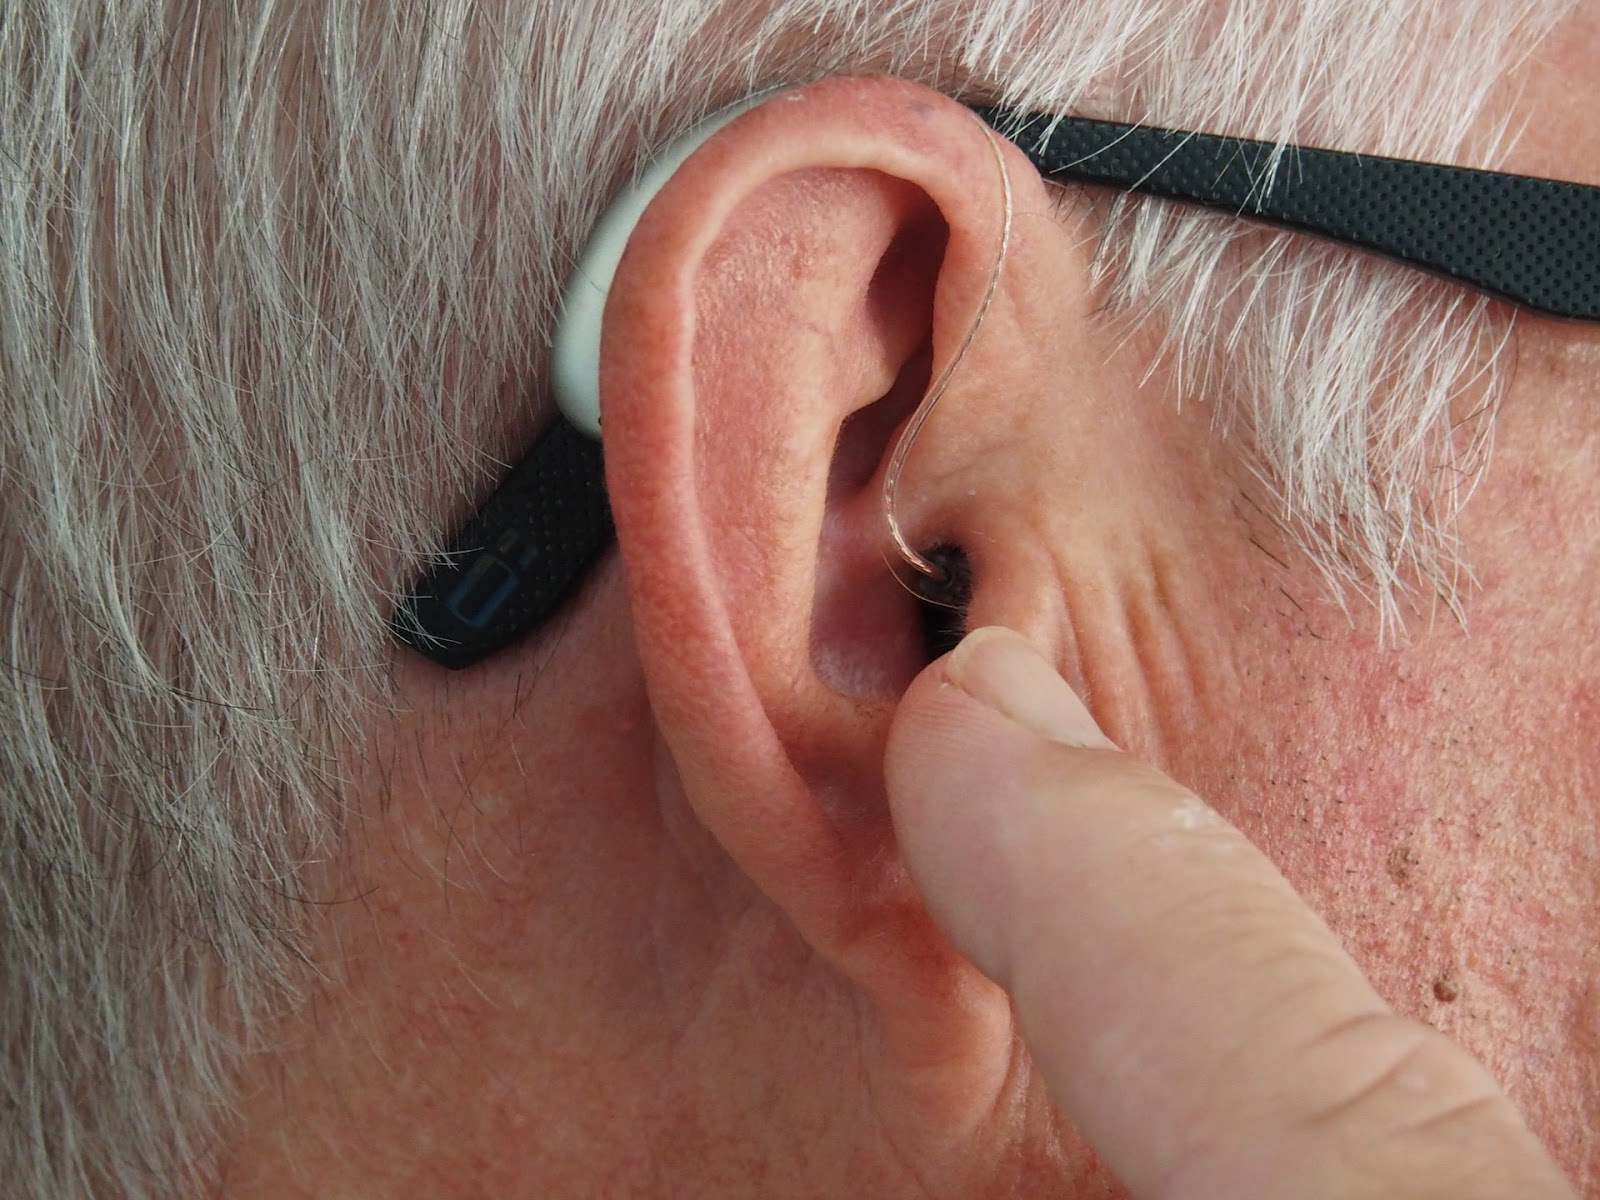 5 Reasons Why You Should Use Hearing Aids